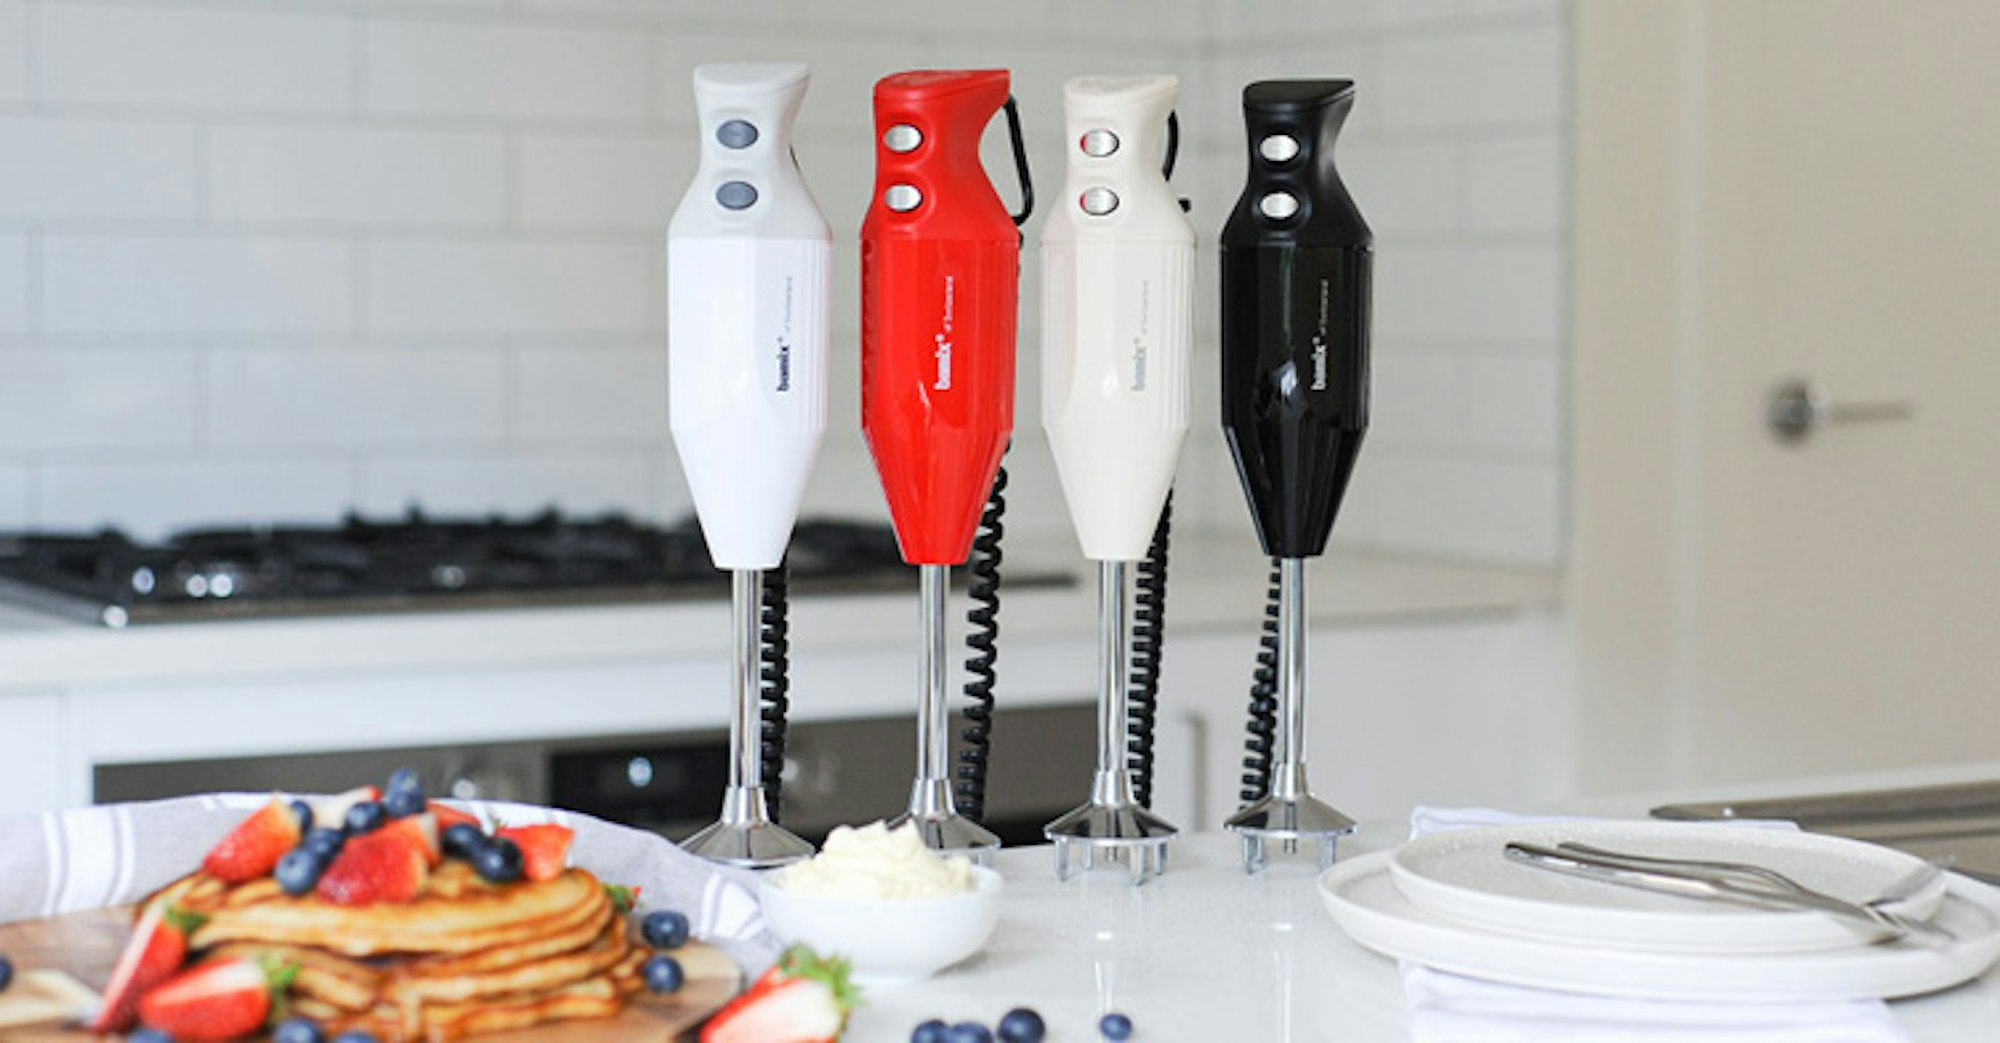 Bamix Stick Blenders and Mixers are kitchen essentials